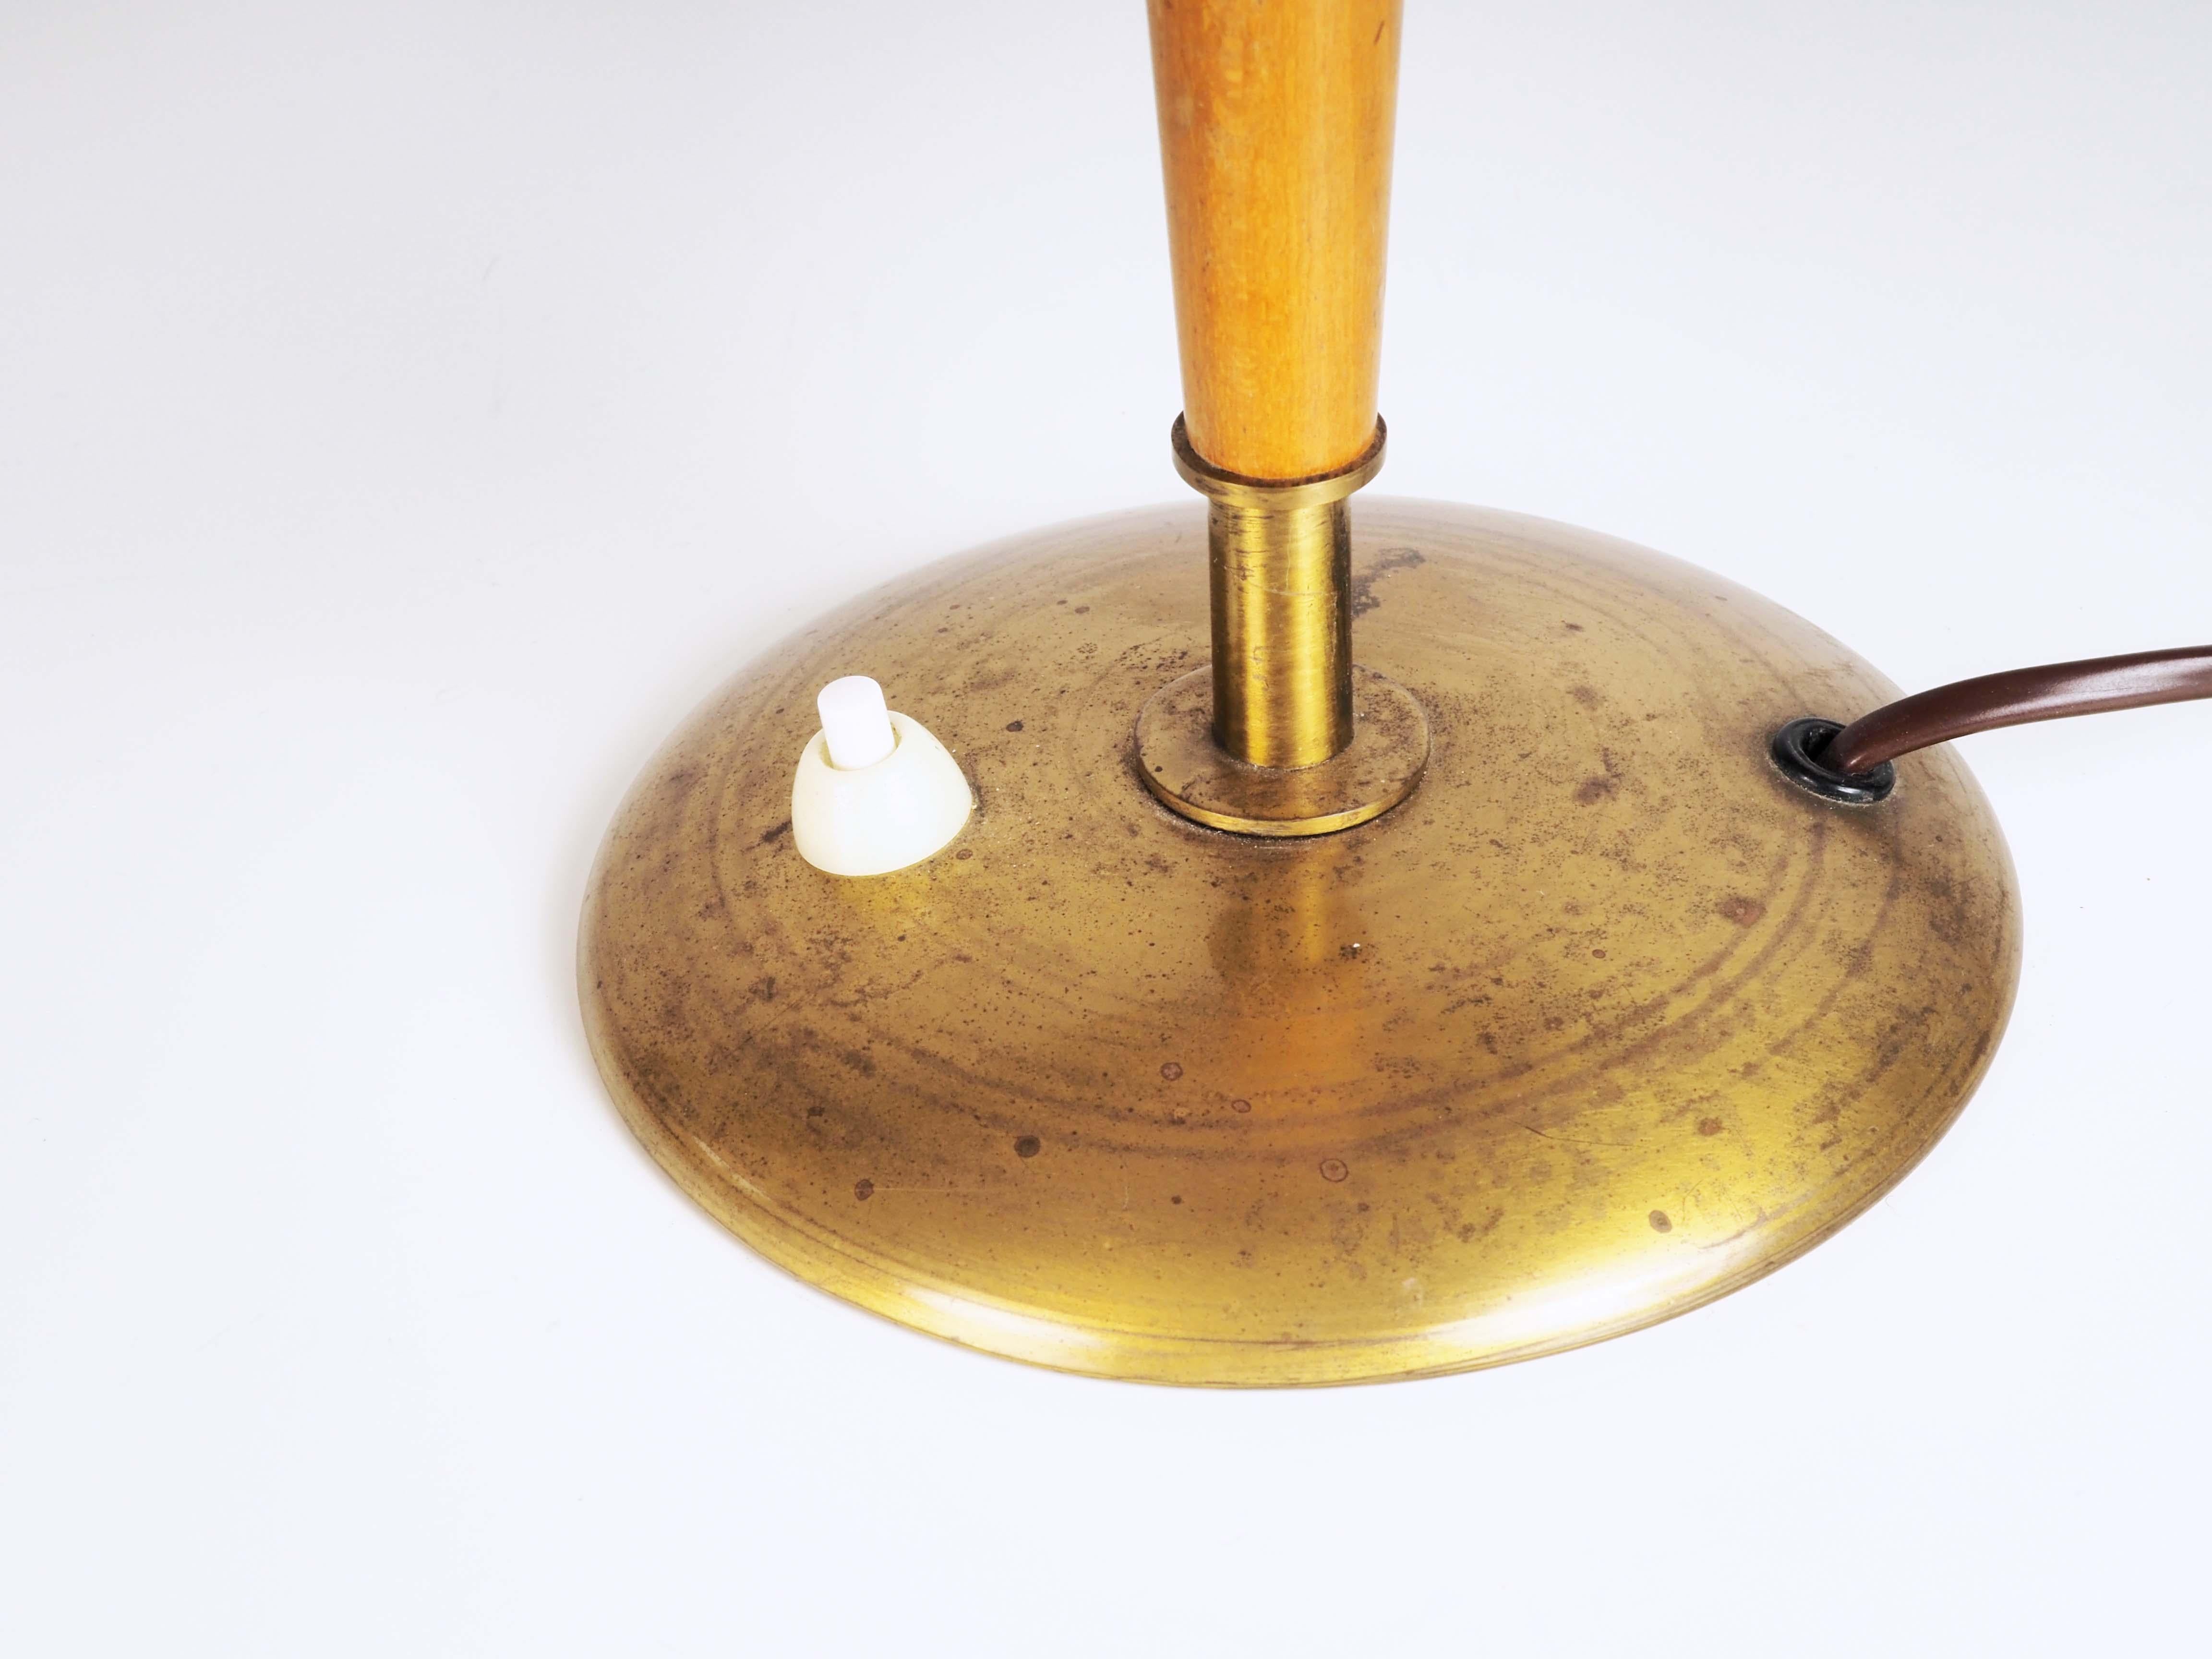 Table lamp in brass and elm. Made in the 1940s by Nordiska Kompaniet, Stockholm, Sweden.